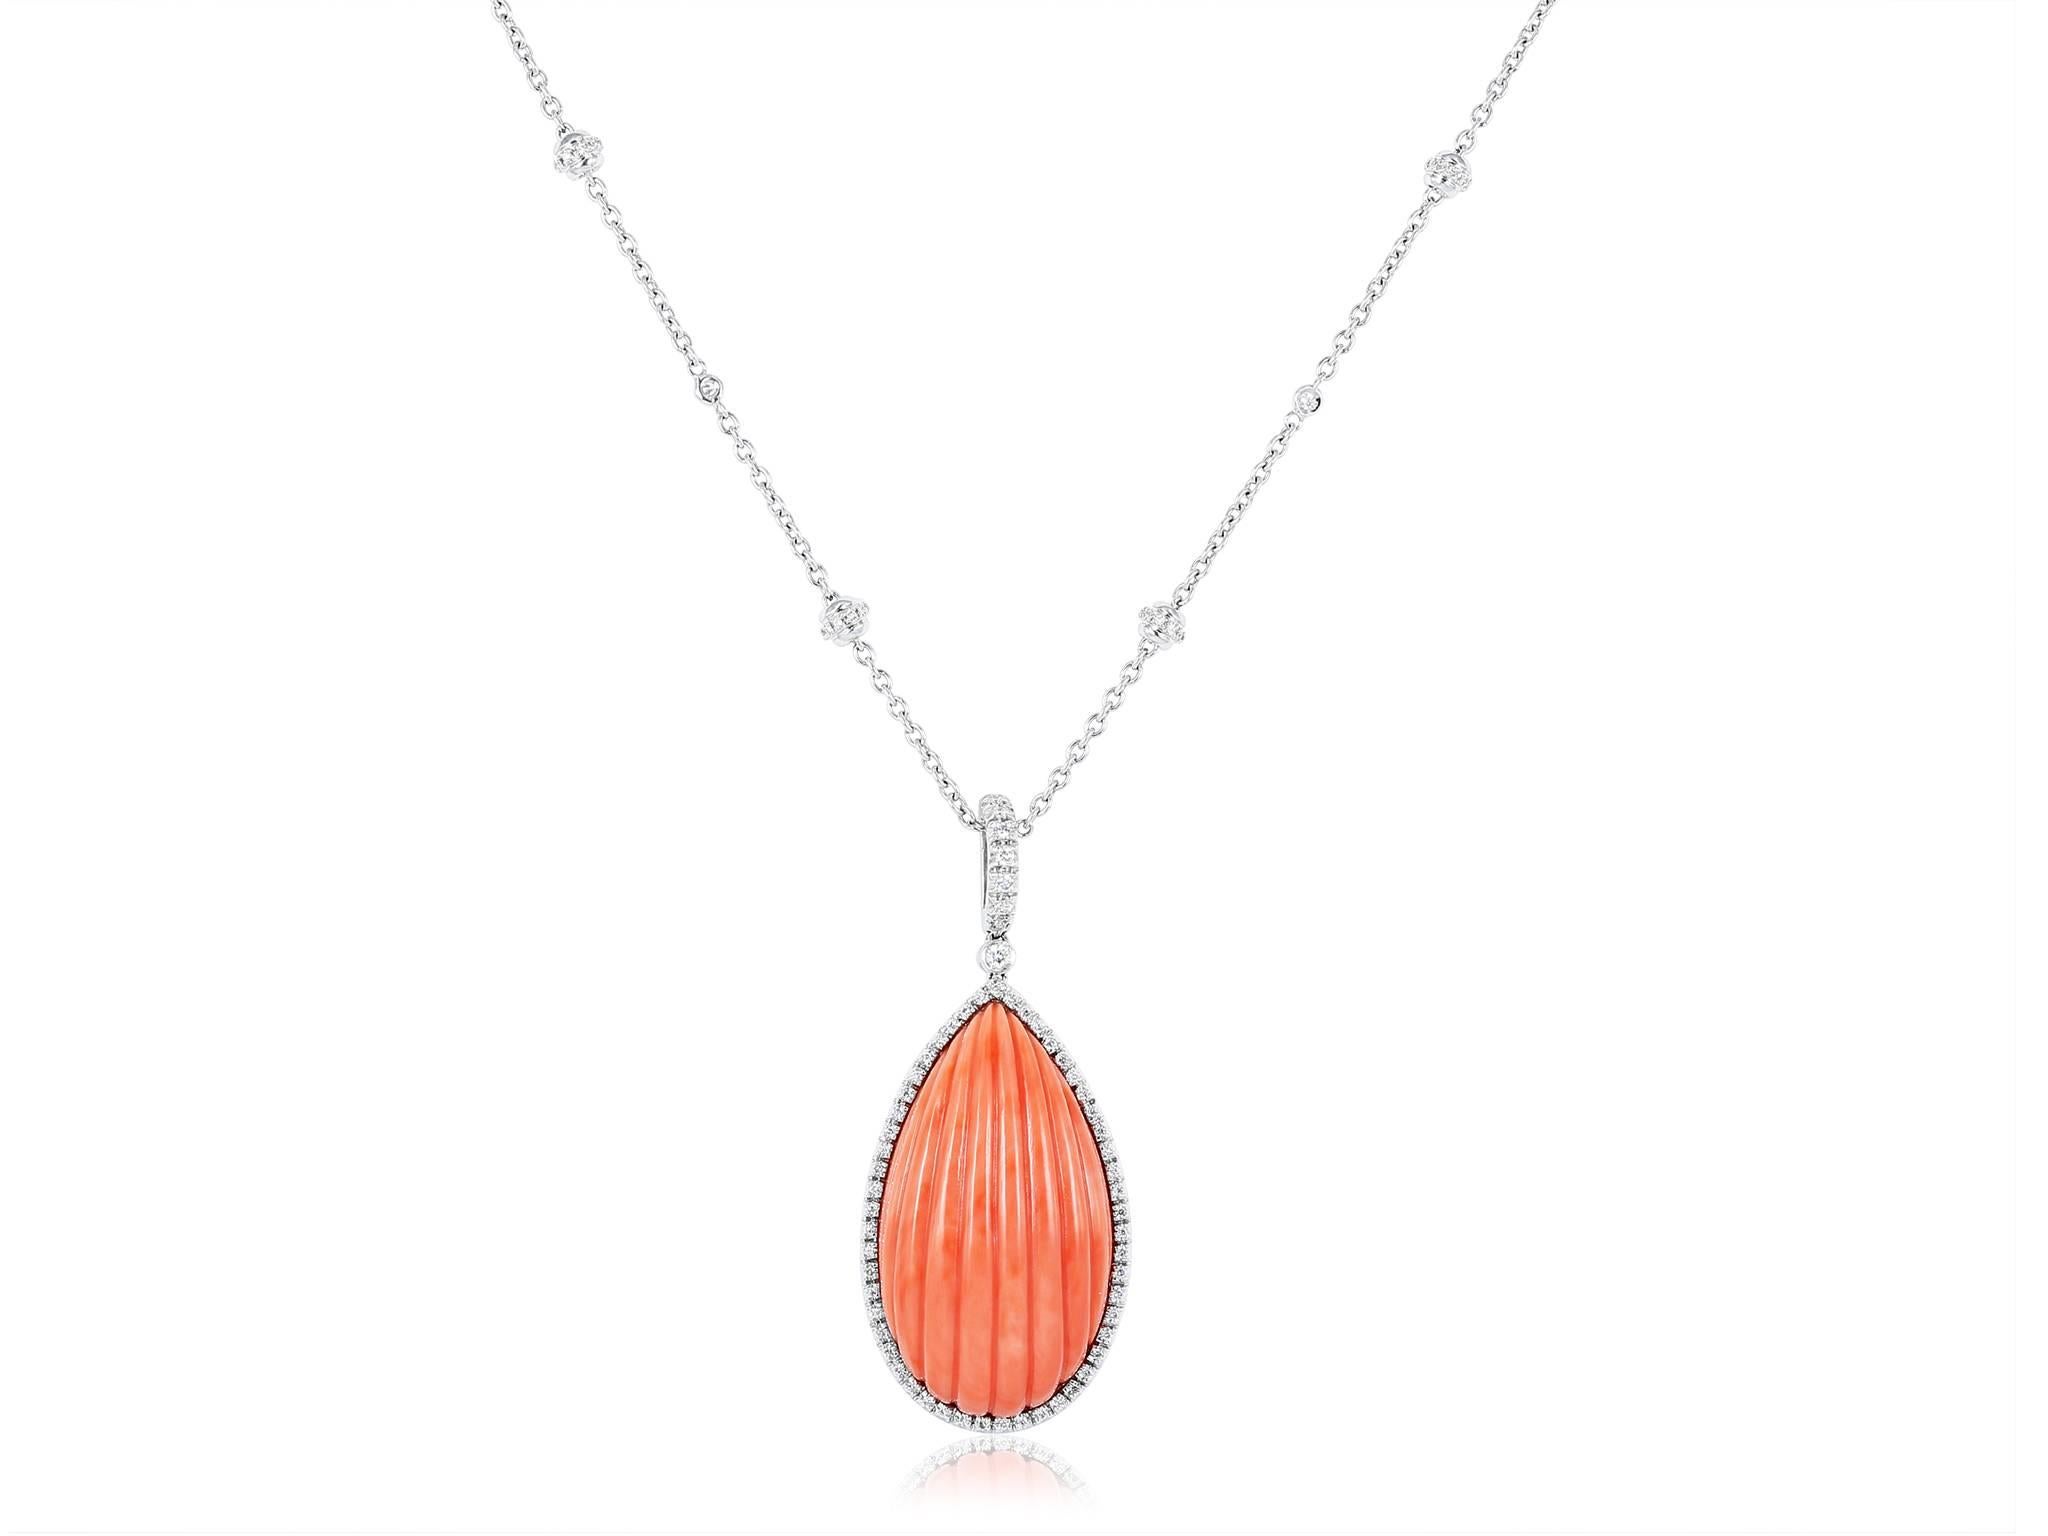 18 karat white gold pendant consisting of 1 tear drop shaped carved coral piece set surrounded by full cut diamond accents, the pendant hangs from an opera length by the yard style necklace set with diamond accents.